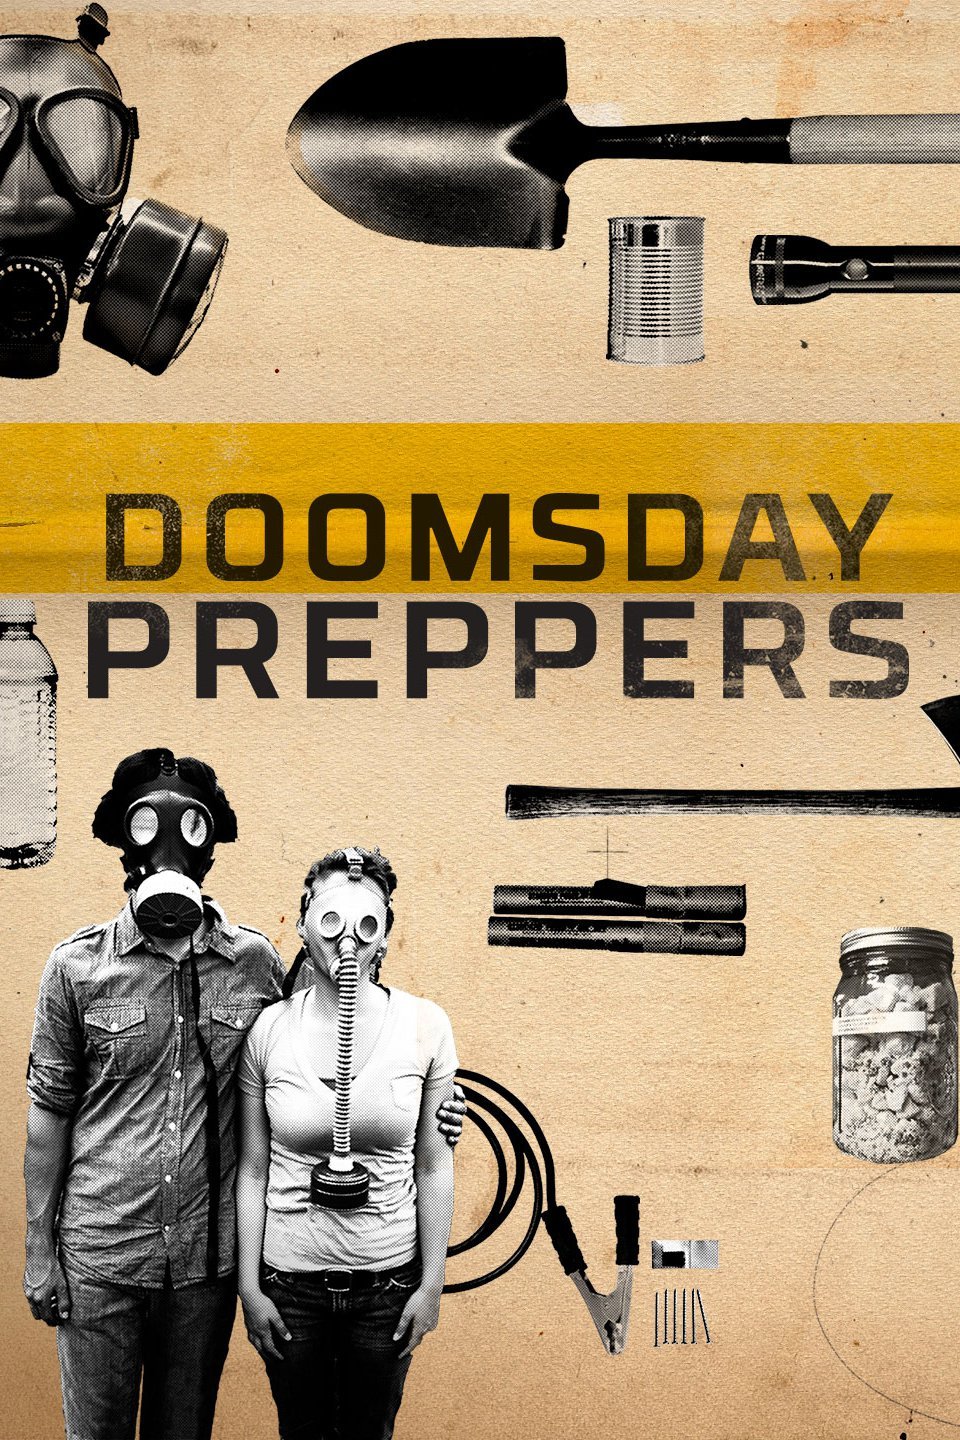 On score anyone preppers? doomsday has perfect a got The 10